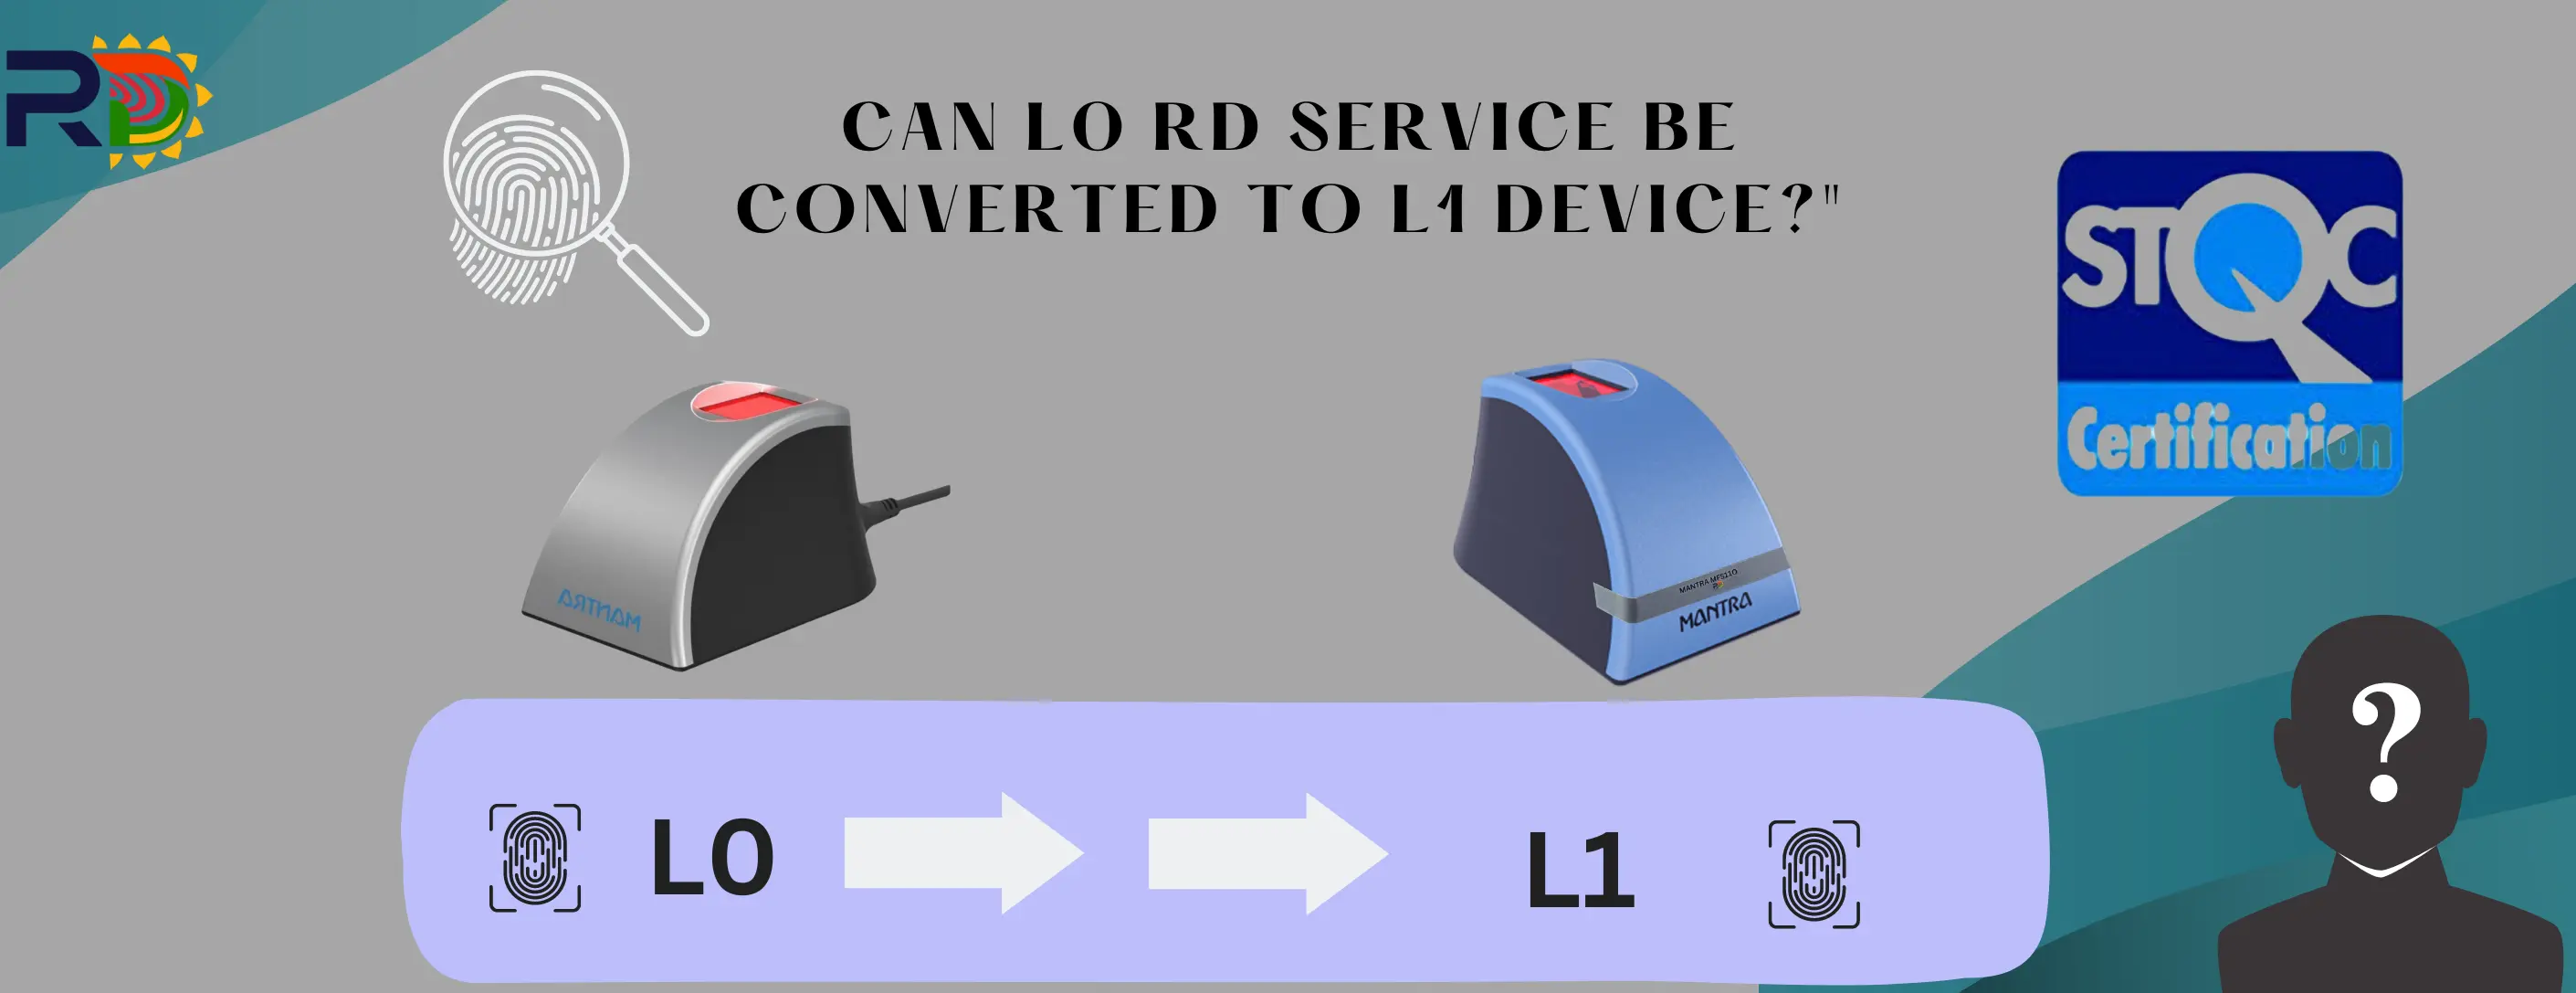 can-l0-rd-service-be-converted-to-l1-device.webp